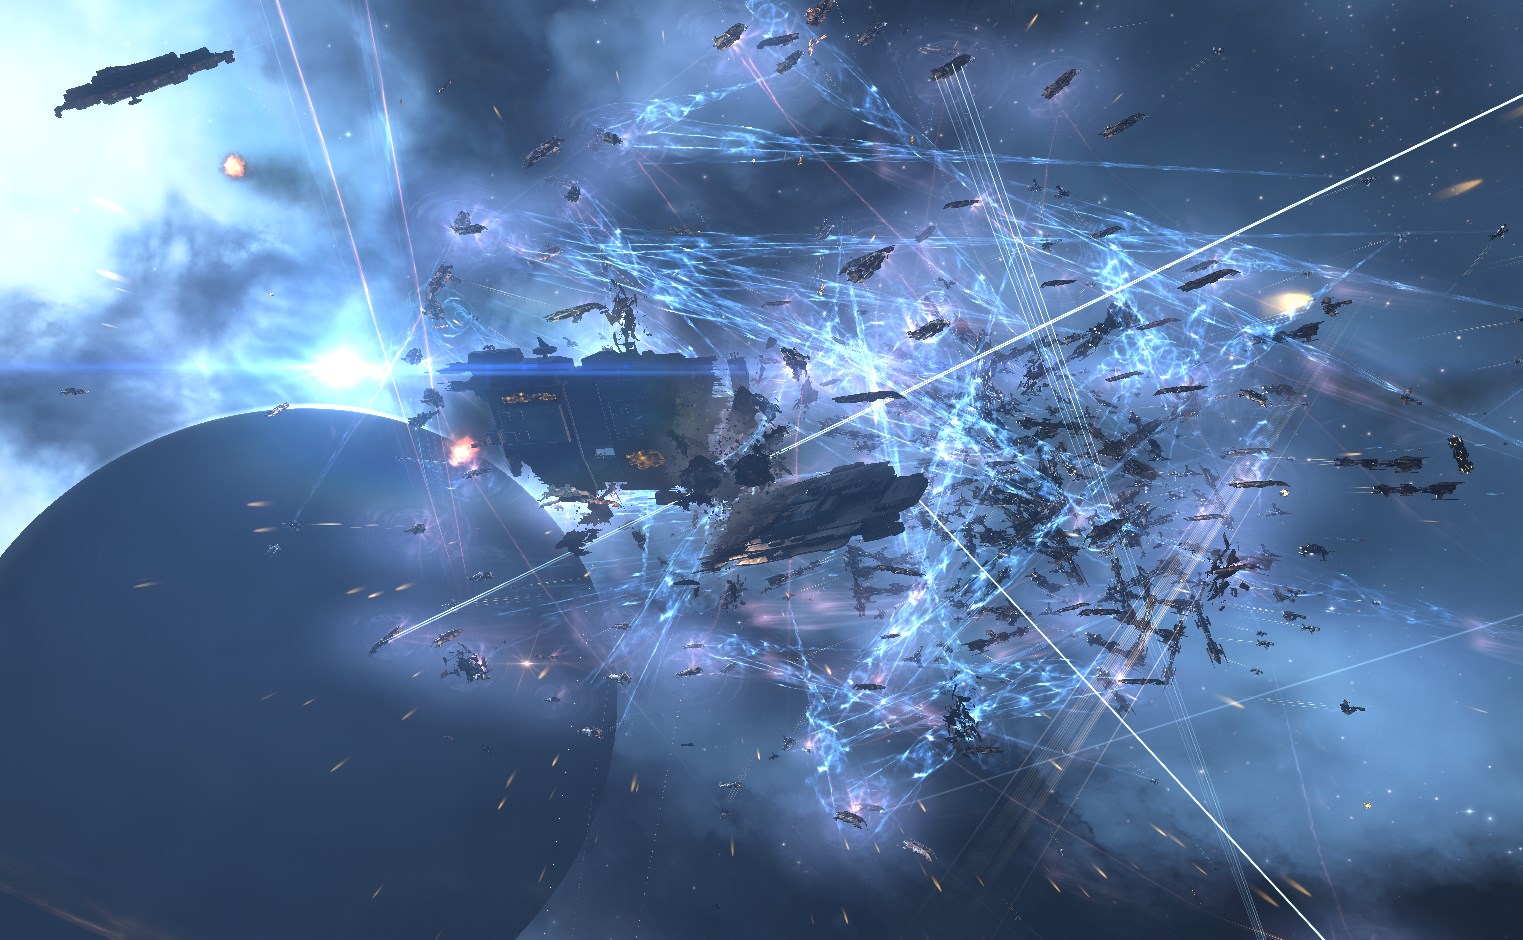 EVE Online Players Destroy $13,000 Worth Of Ships In A Surprise Attack